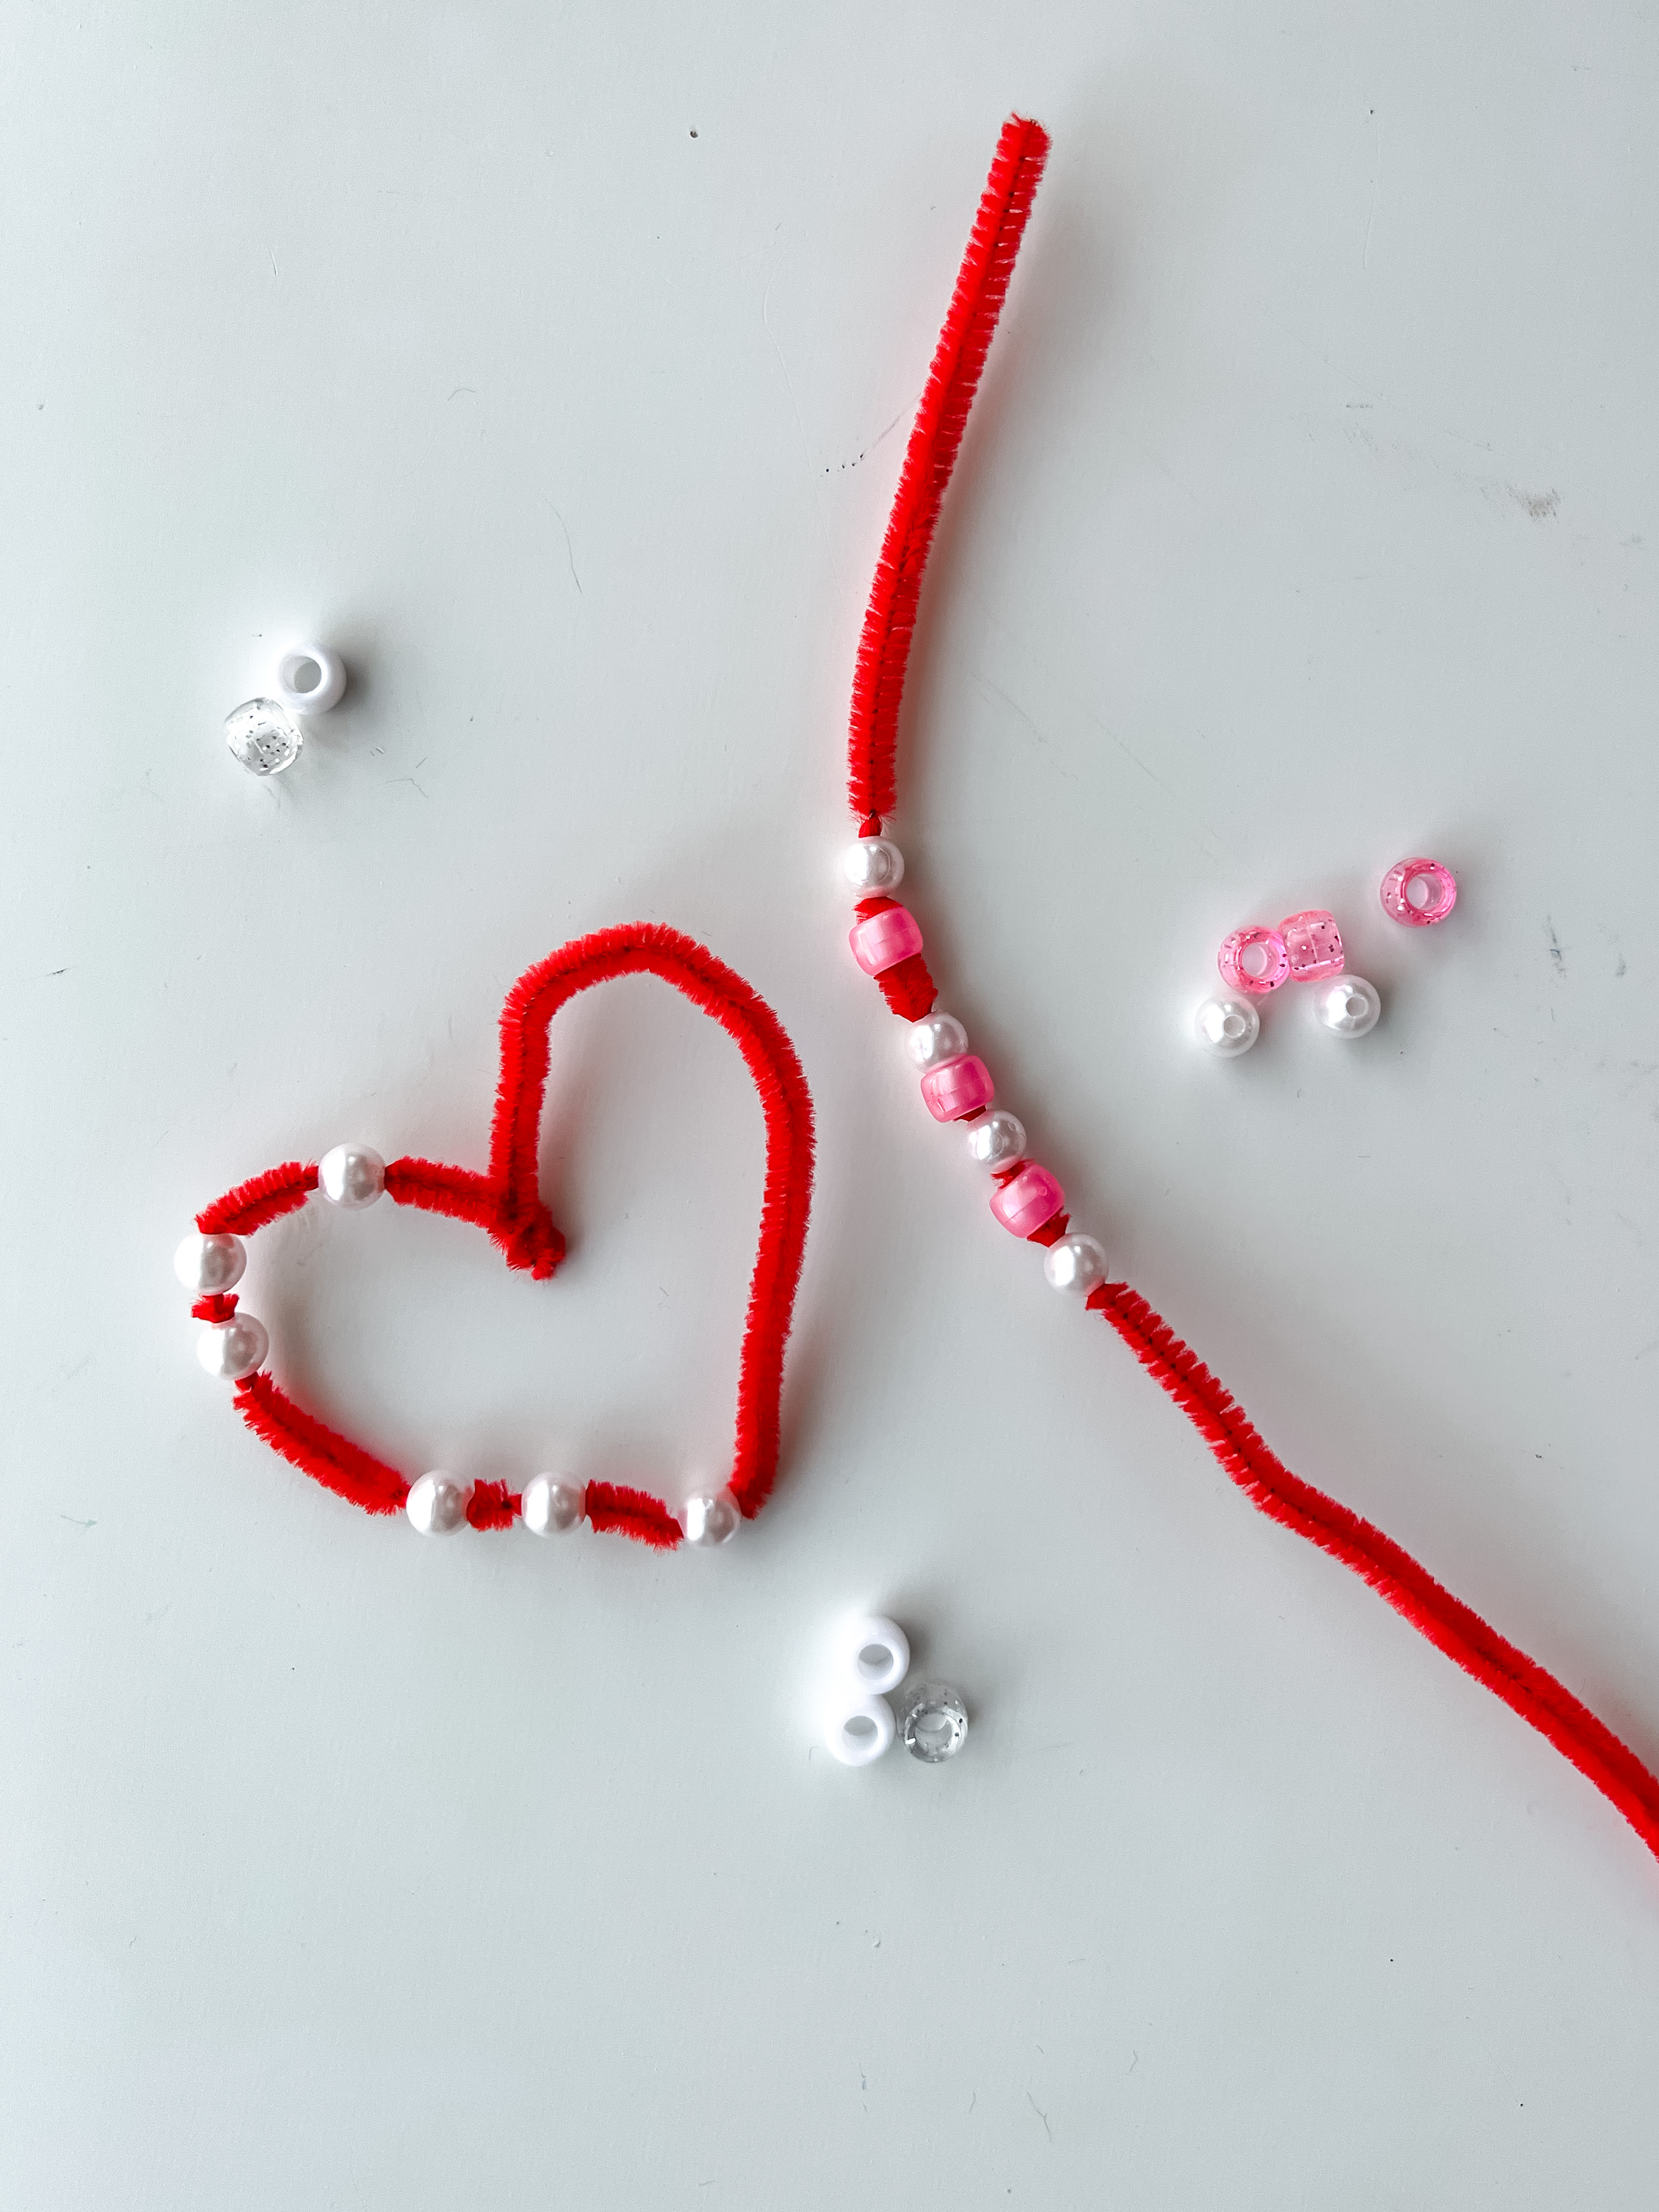 50 Easy Crafts for Kids: threading beads